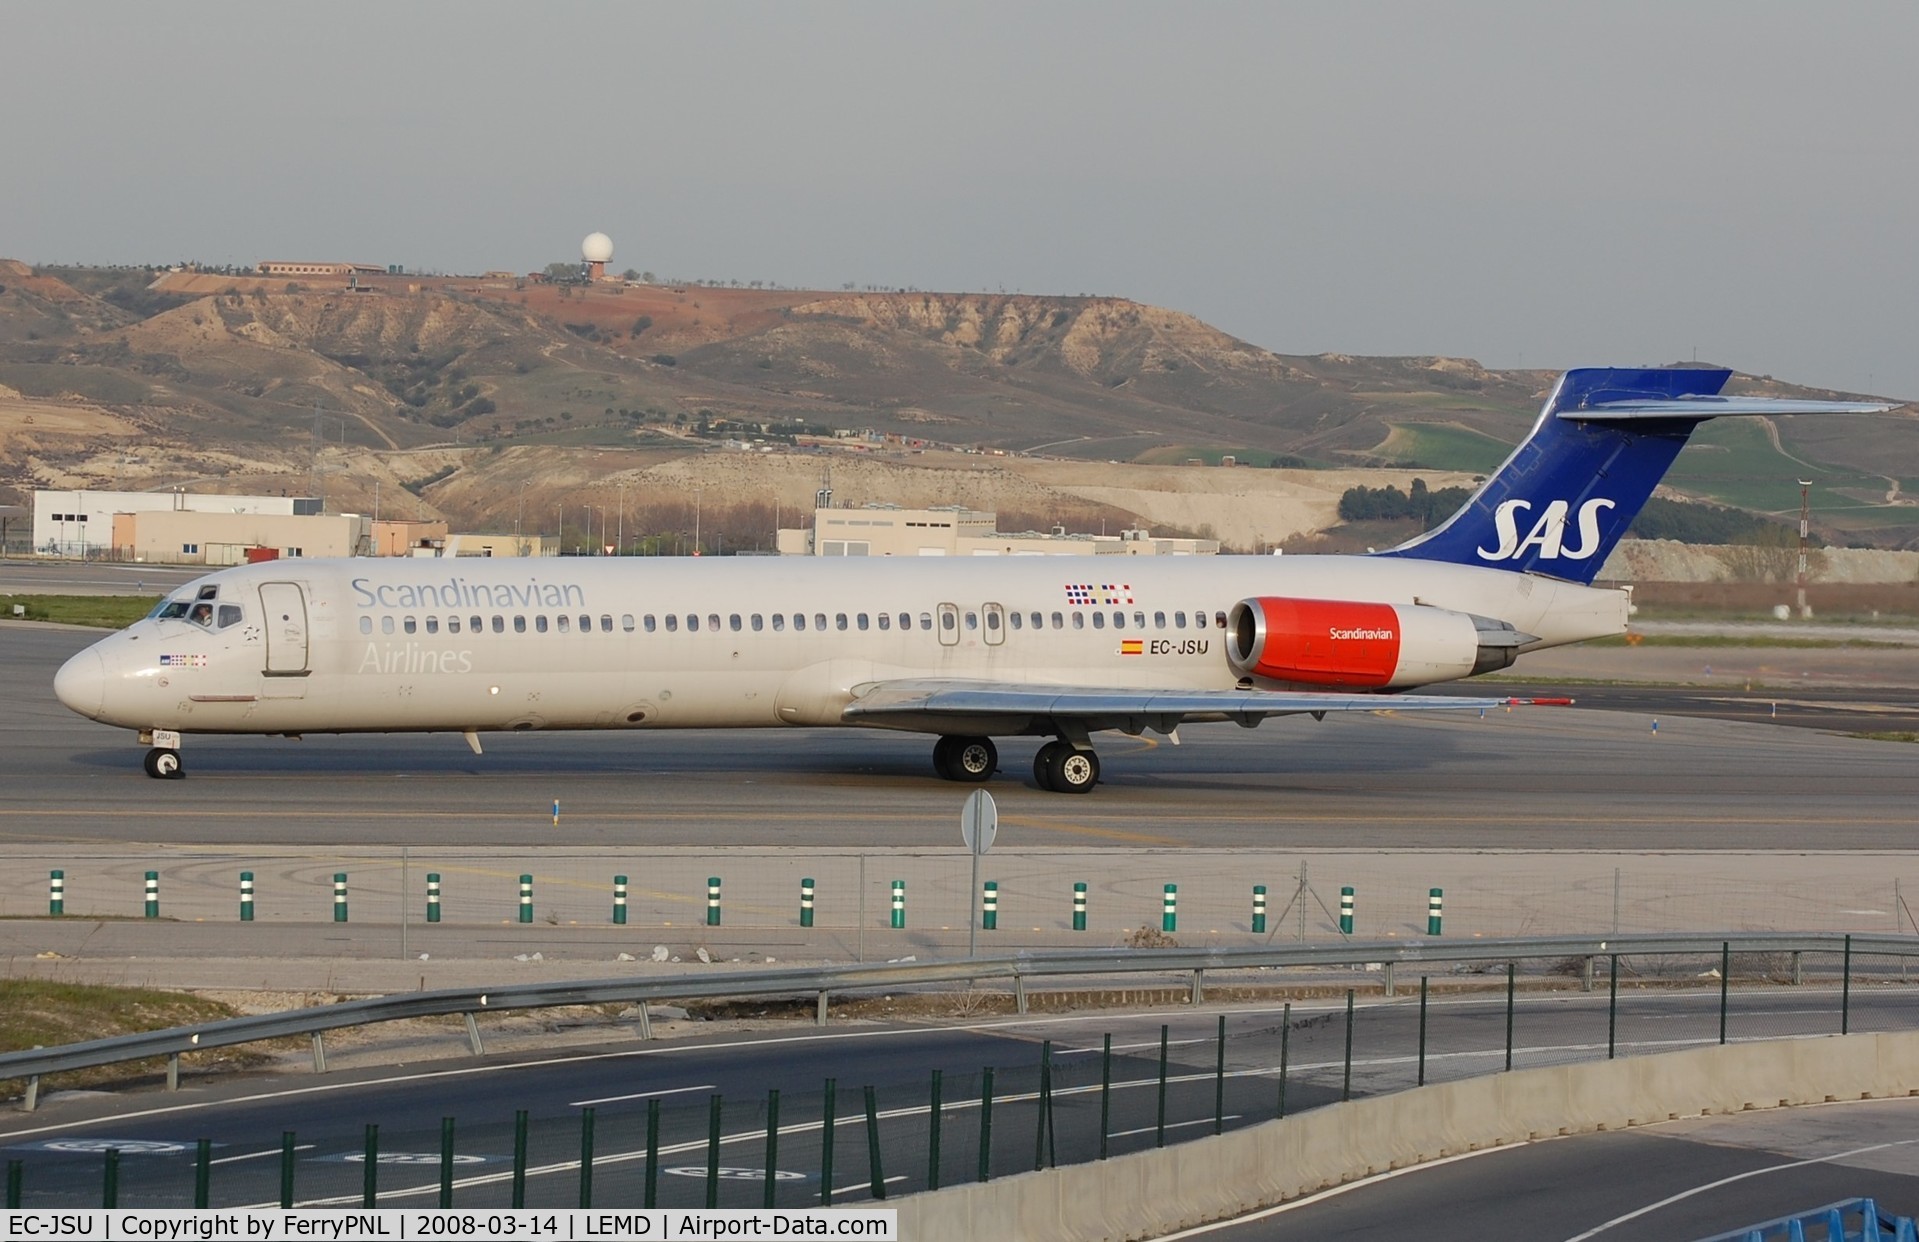 EC-JSU, 1990 McDonnell Douglas MD-87 (DC-9-87) C/N 49610, Spanair MD87 operated in SAS livery